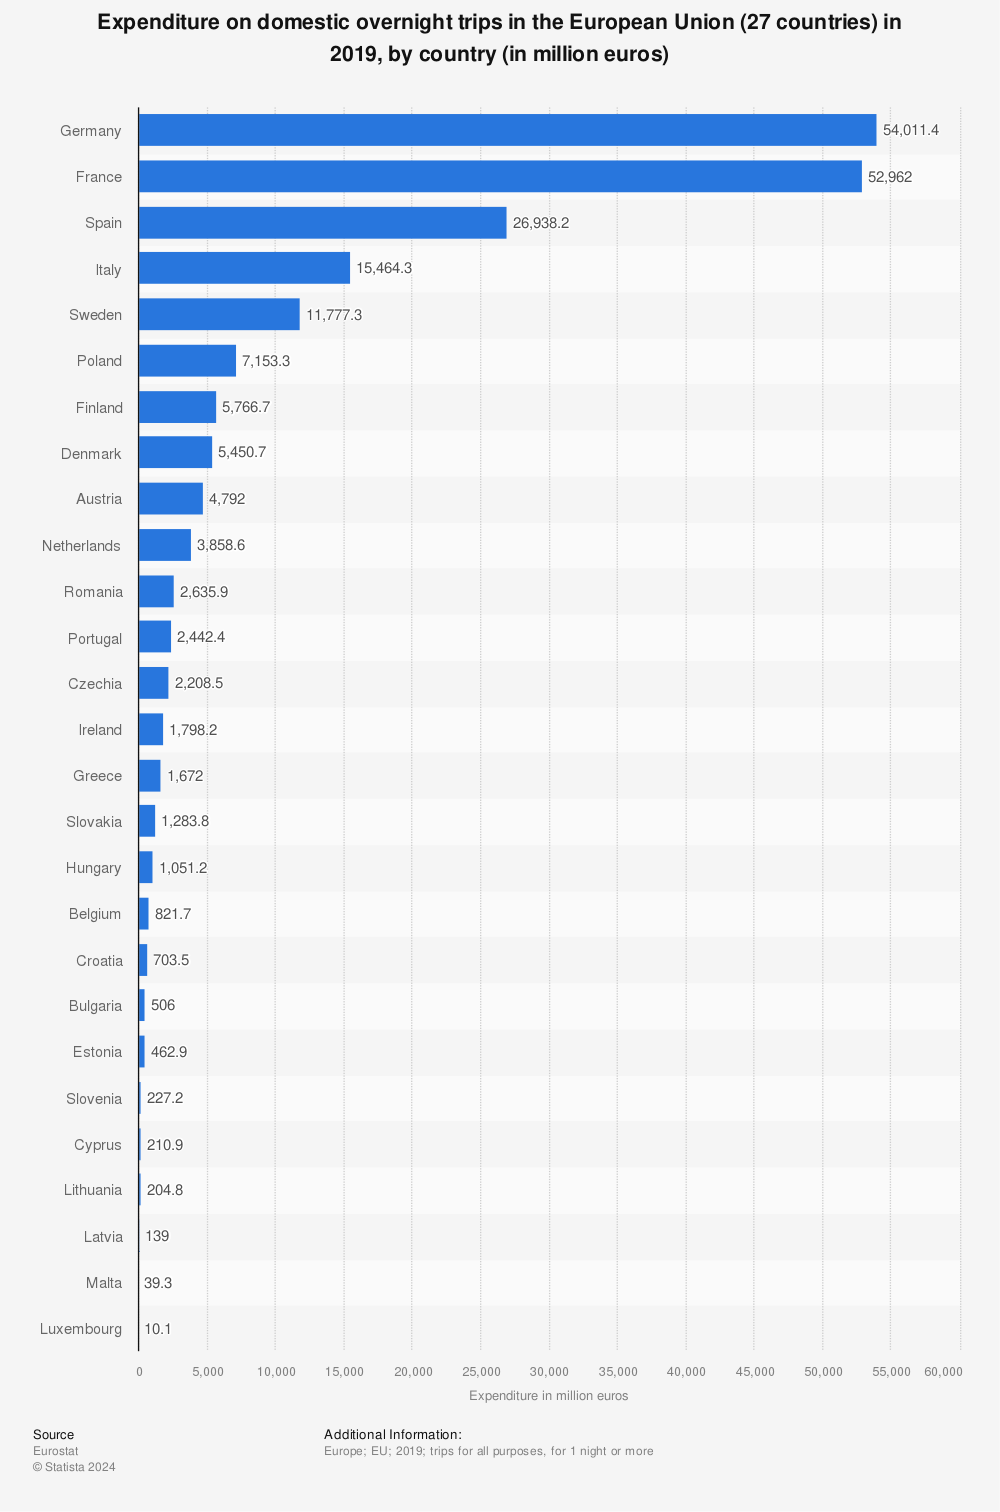 Statistic: Expenditure on domestic overnight trips in the European Union (27 countries) in 2019, by country (in million euros) | Statista